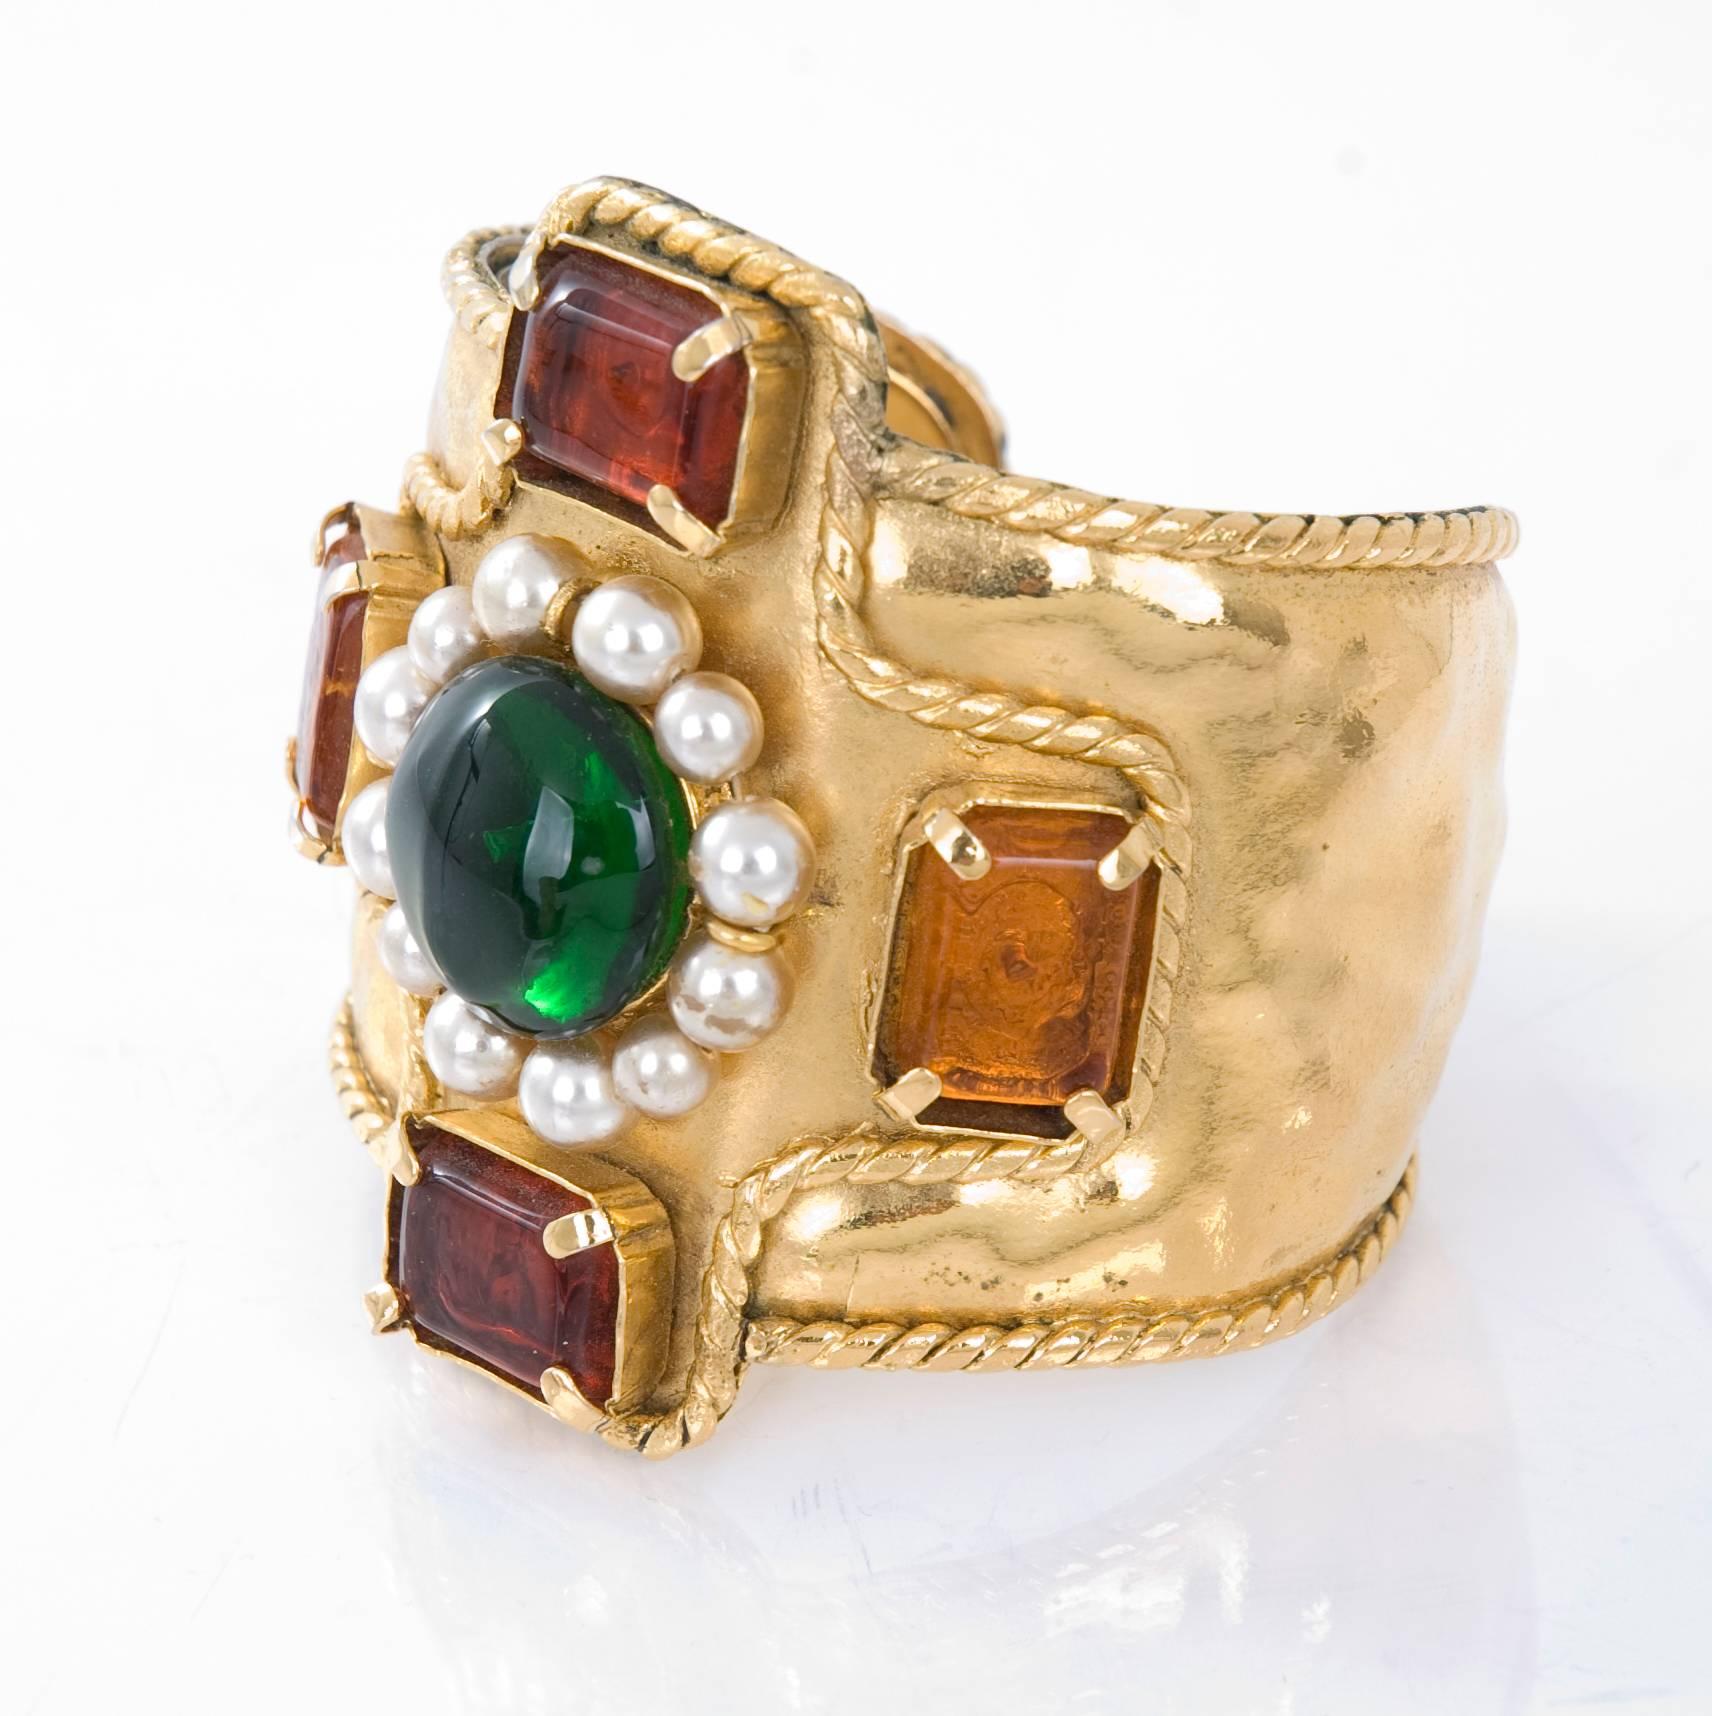 2005 Chanel cuff bracelet with pearl beads and green, gold and red gripoix stones. Stamped on Chanel cartouche at interior. 
In excellent condition.